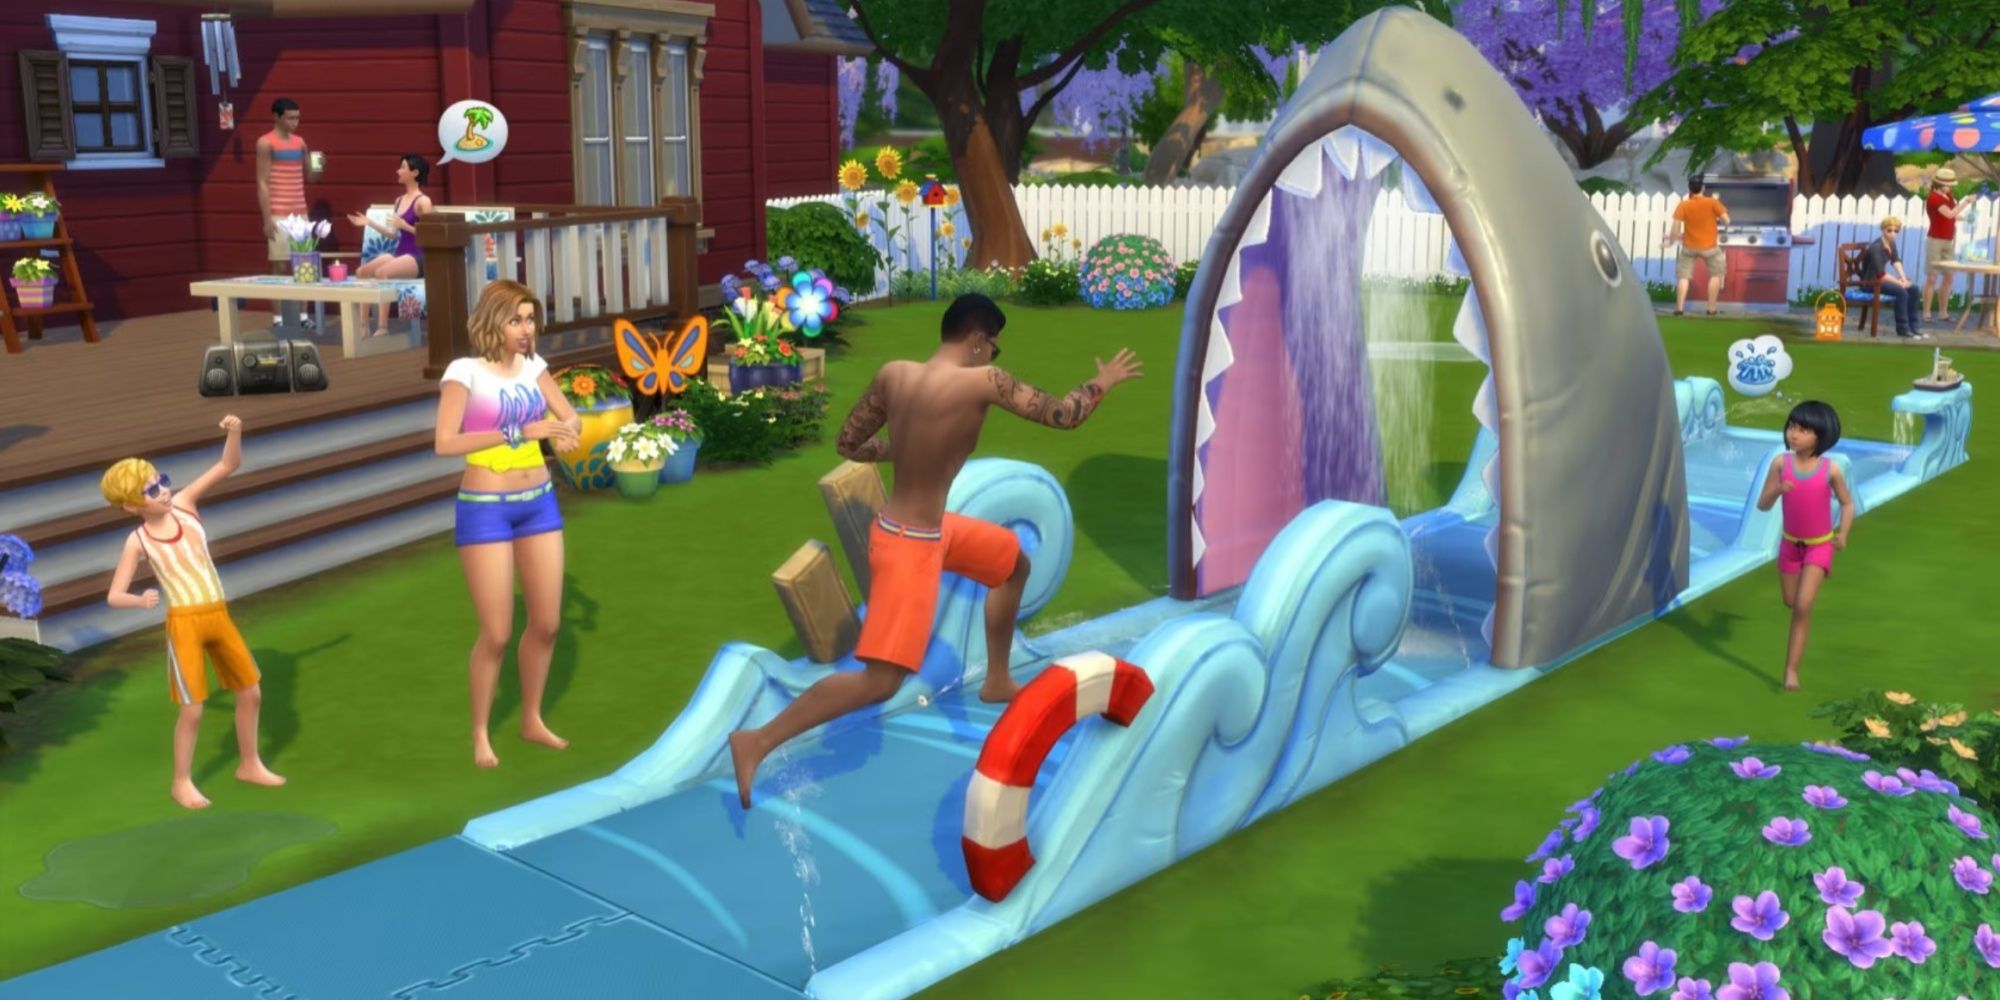 sims playing with a shark slip n slide in the sims 4 backyard stuff